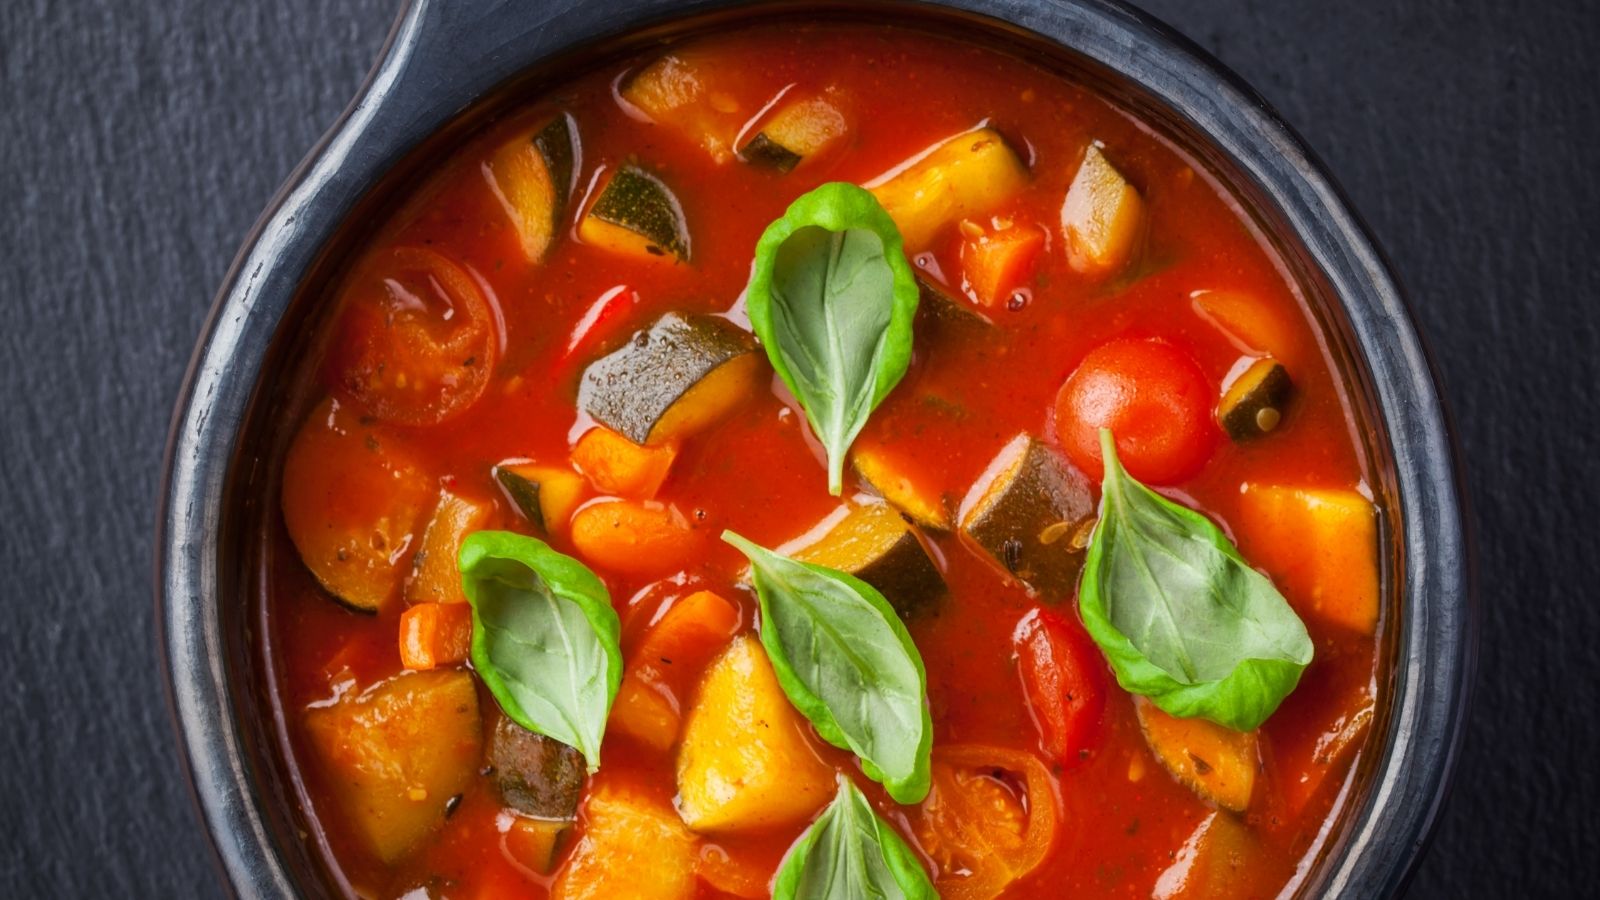 Summer minestrone soup recipe image of summer minestrone soup recipe with tomatoes and courgettes